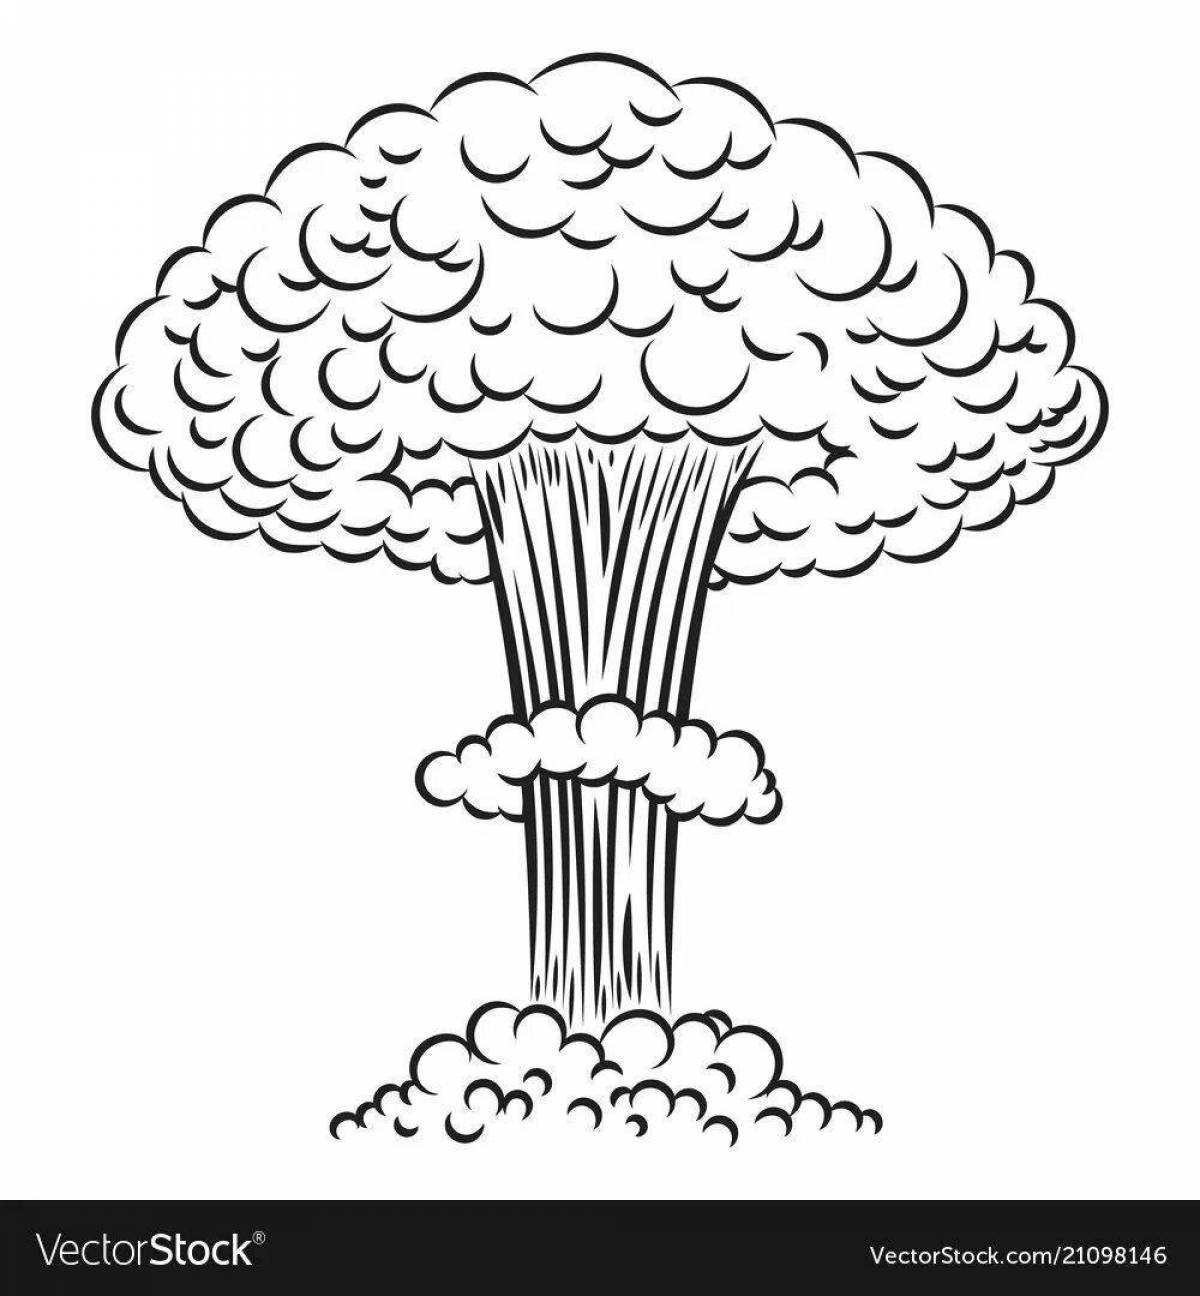 Nuclear explosion enchanting coloring book